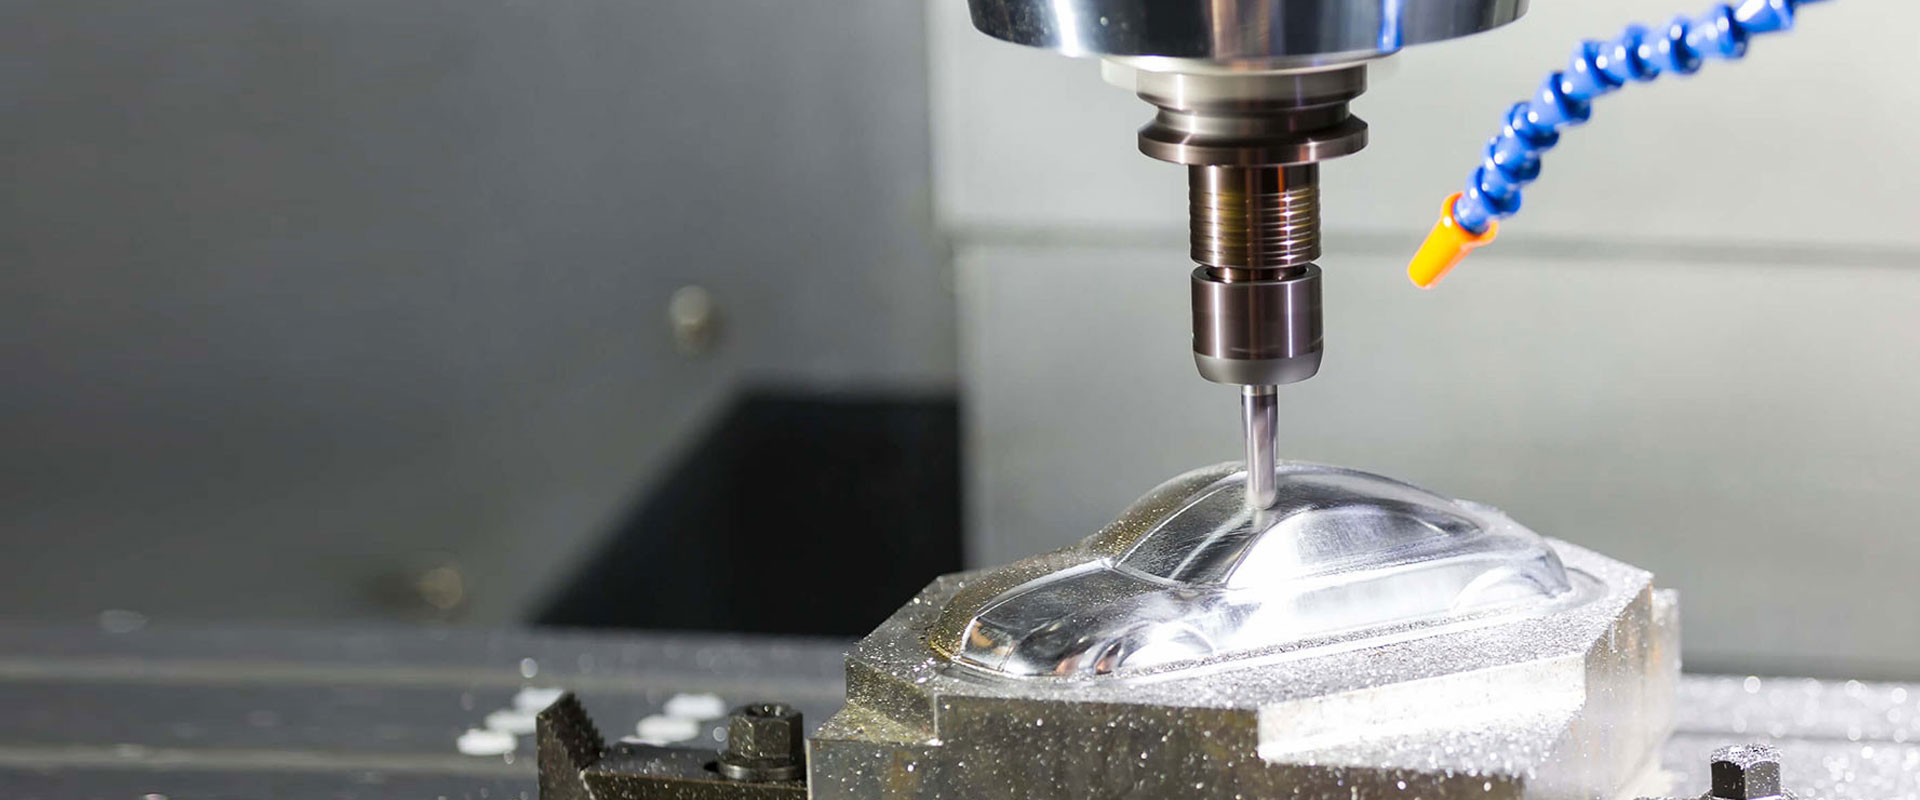 One-stop precision machining and rapid prototyping services